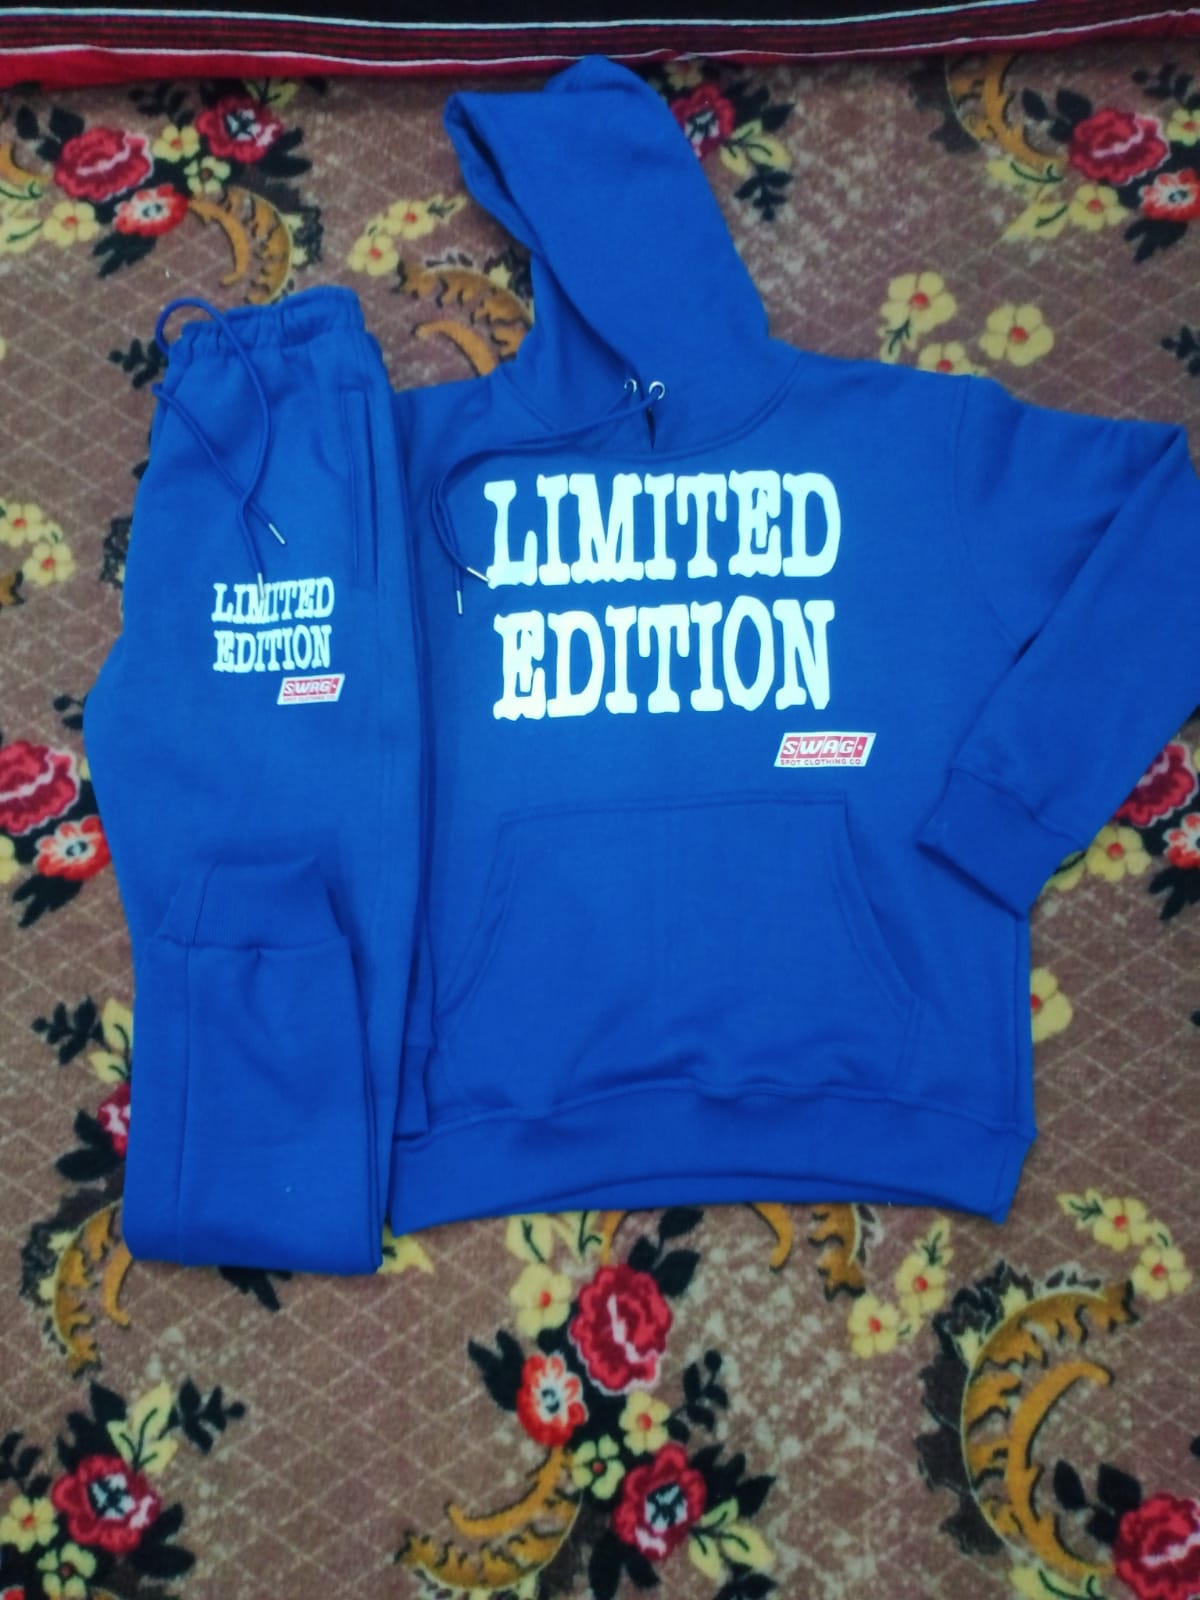 Limited Edition Unisex Sweatsuit - Swag Spot Clothing Co